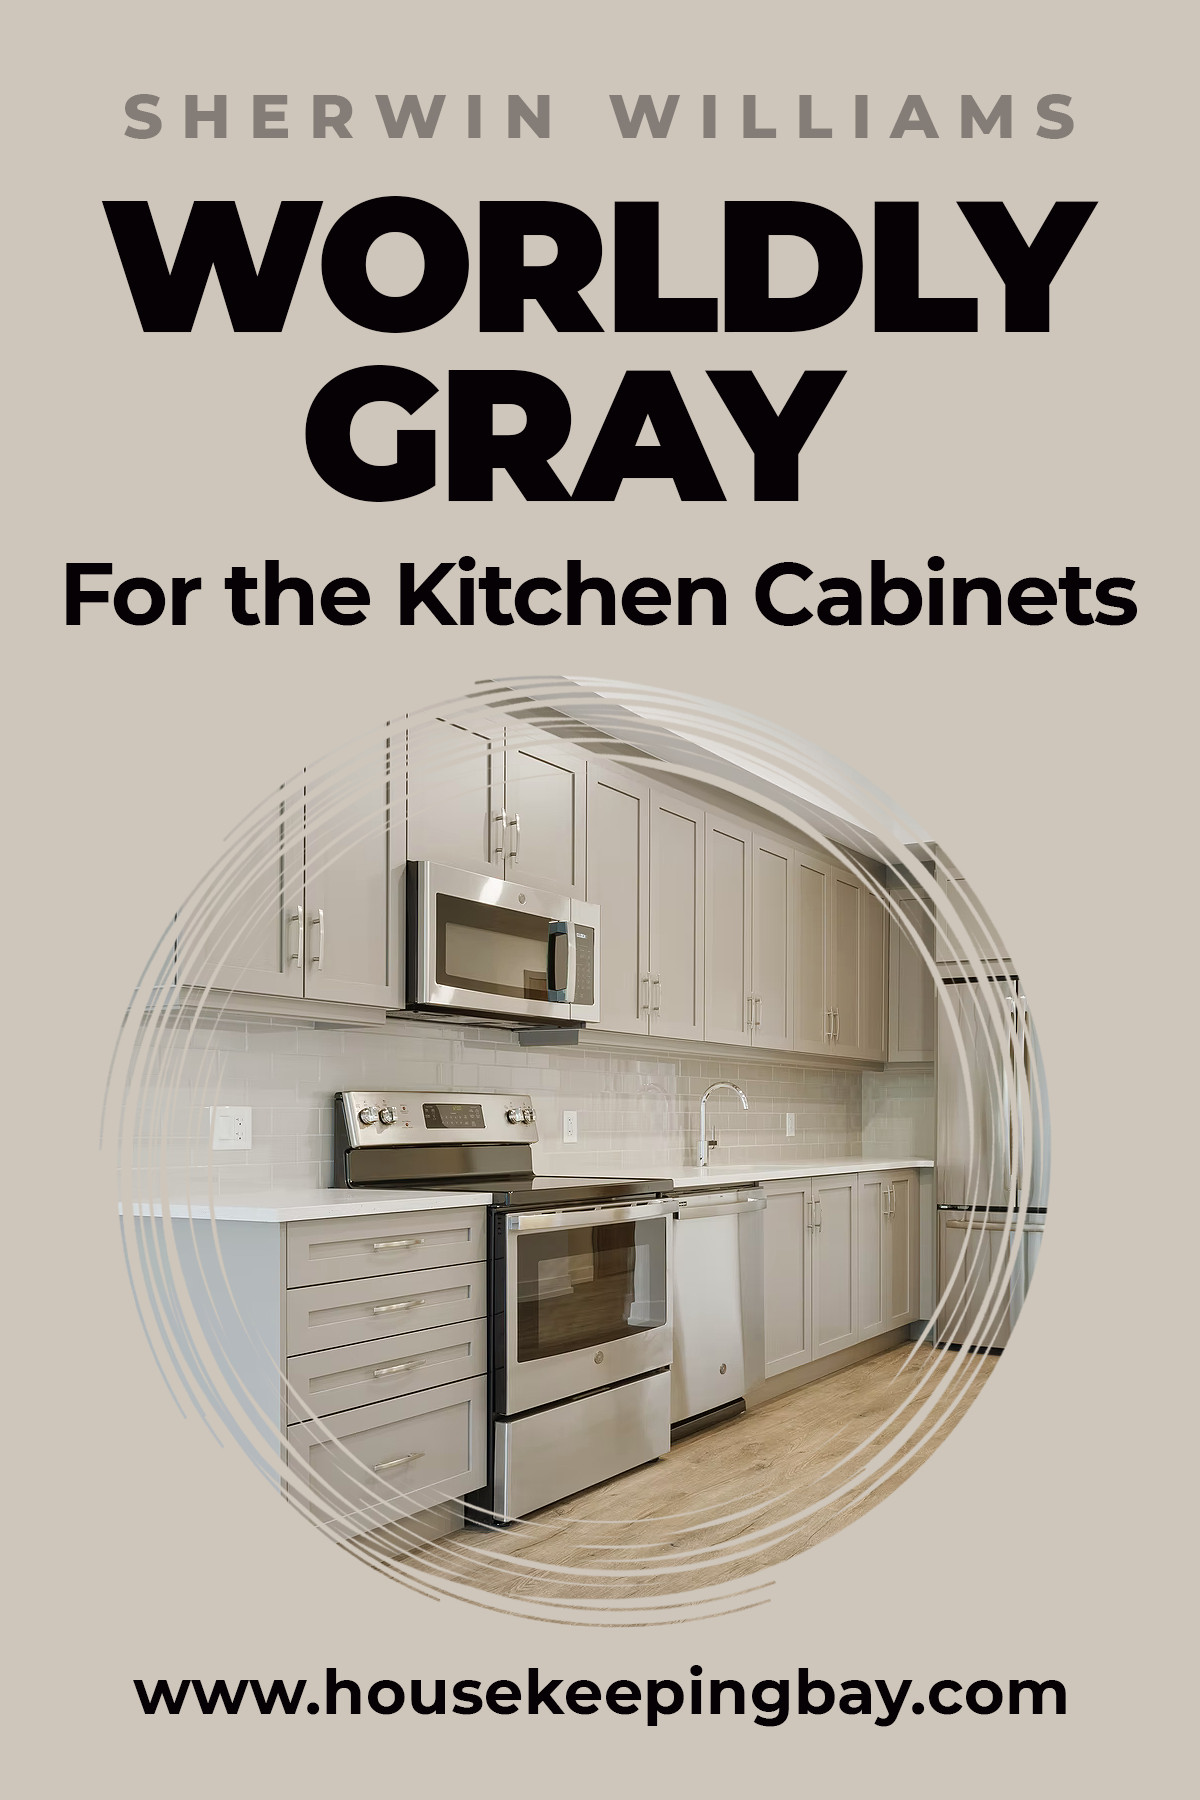 Worldly Gray for the kitchen cabinets